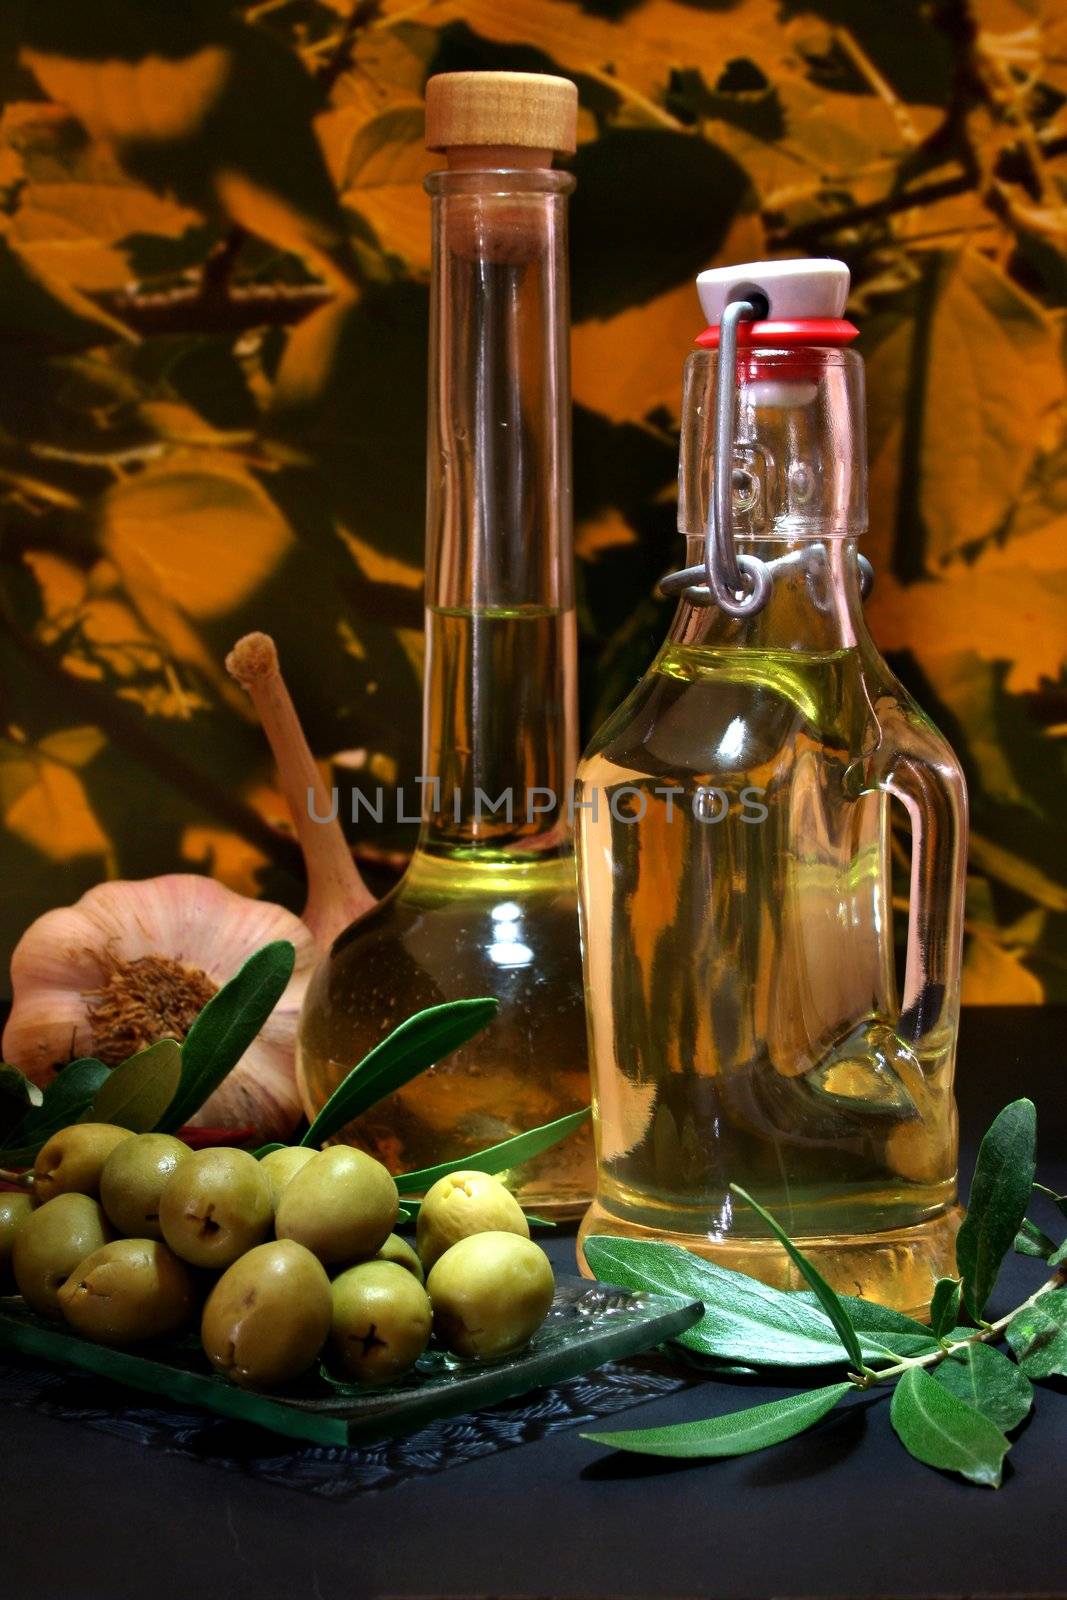 Olive oil with olive branch and fresh ingredients